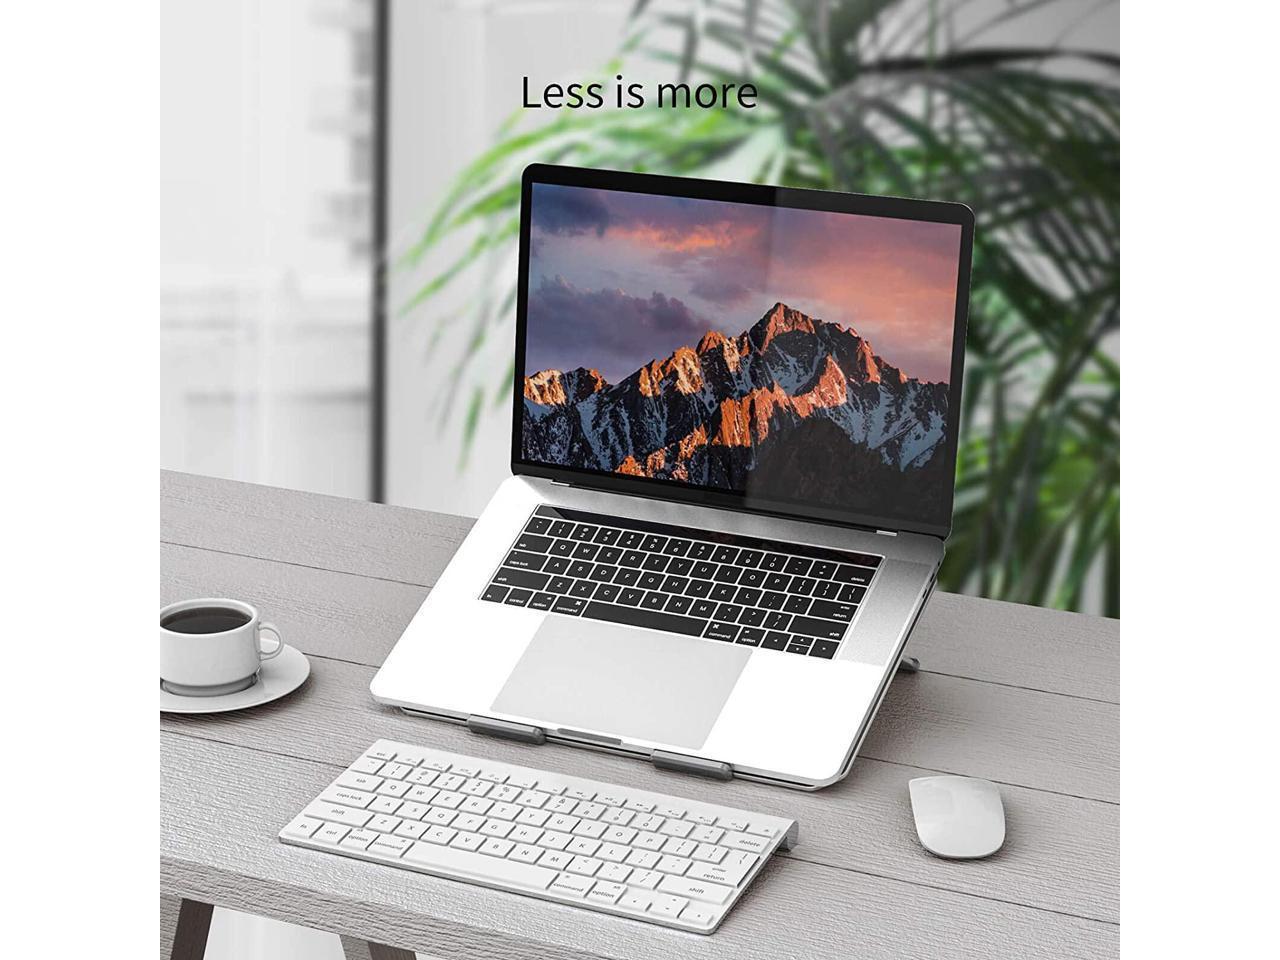 Adjustable Aluminum Ergonomic Foldable Portable Desktop Holder Compatible with MacBook Air Pro Dell Upgraded Laptop Stand Befayoo Laptop Holder Riser Computer Tablet Stand More 10-15.6” Laptops and Tablets HP Lenovo 